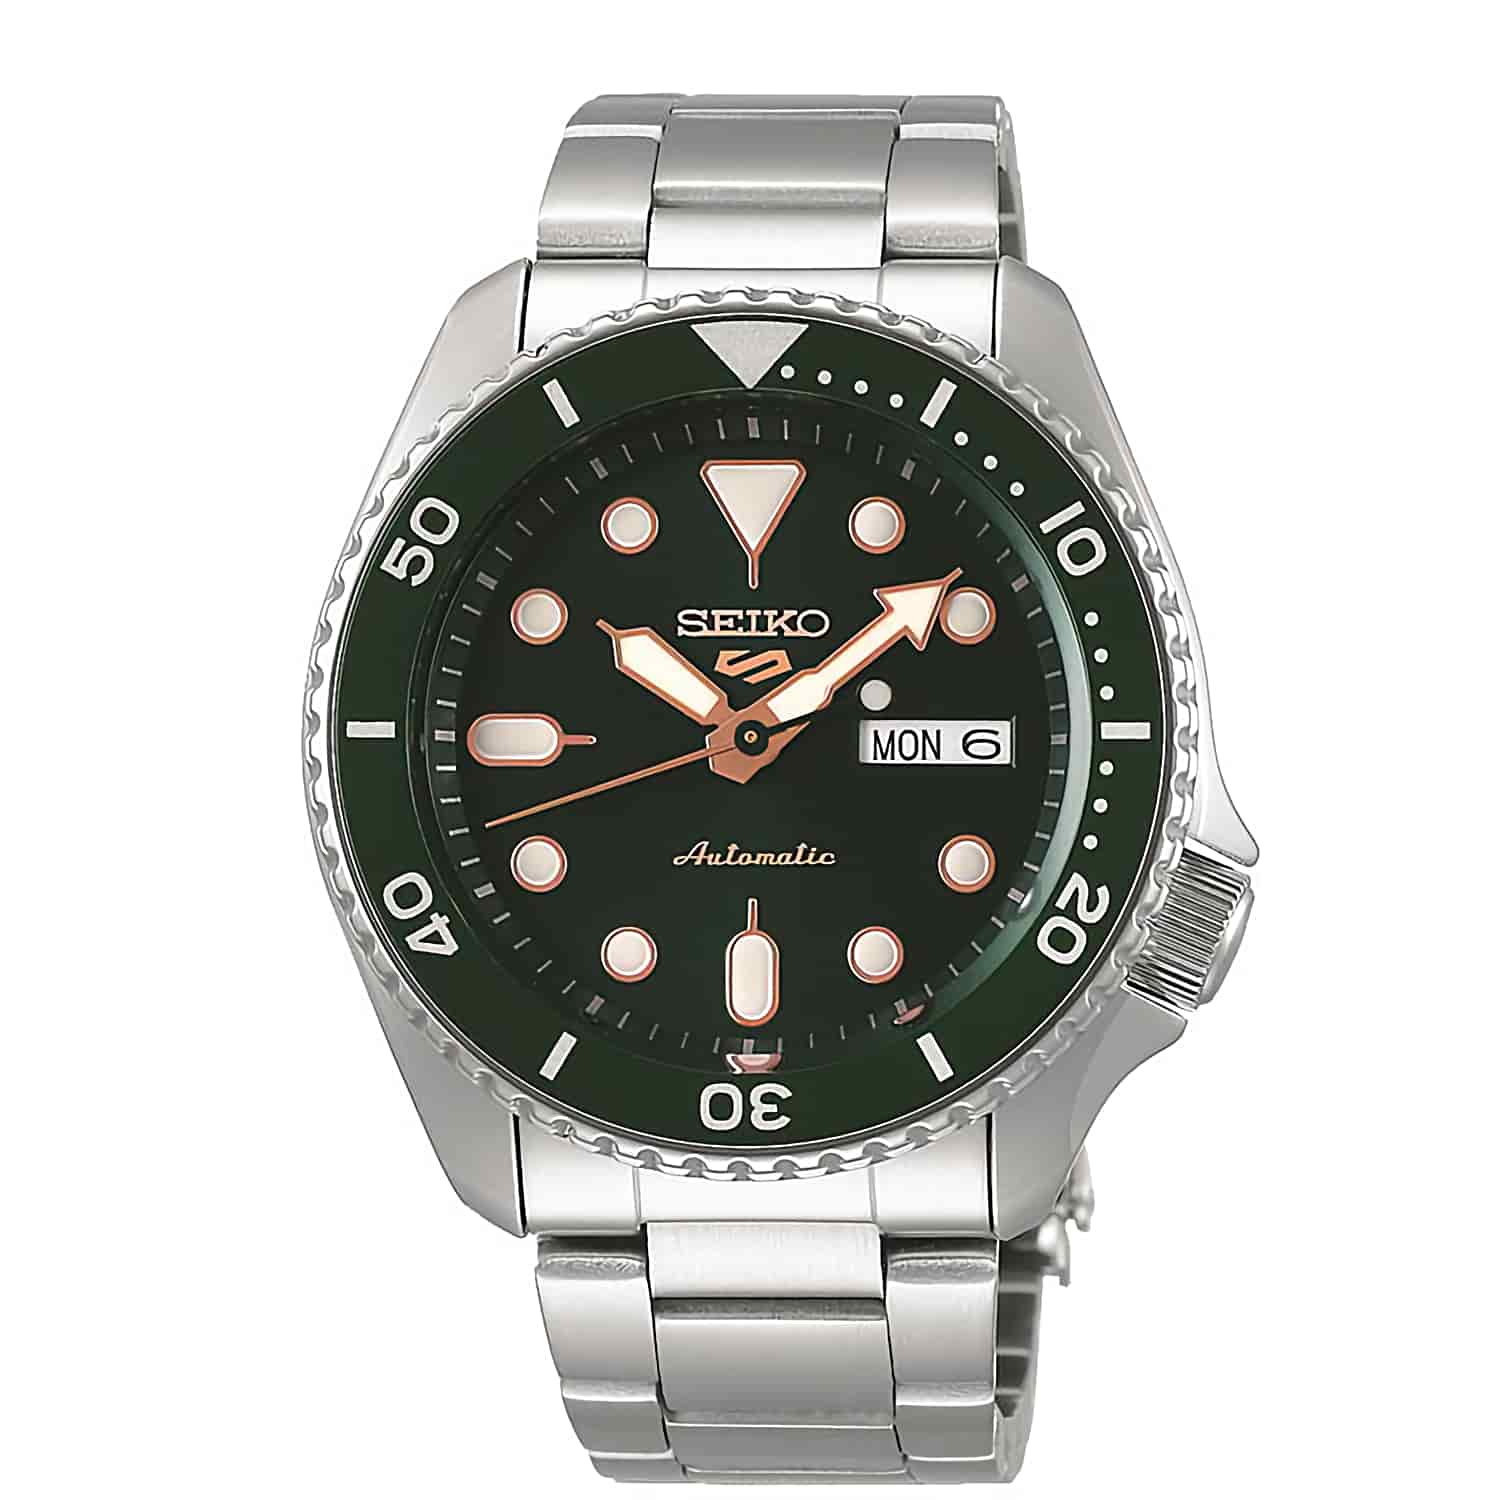 SRPD63K SEIKO 5 Gents Automatic Stainless Steel Watch. SEIKOs iconic watch collection, the SEIKO 5 series was first introduced in 1963 and has been an integral part of the SEIKO watch family ever since. 2019 sees the SEIKO 5 series take on a new modern lo